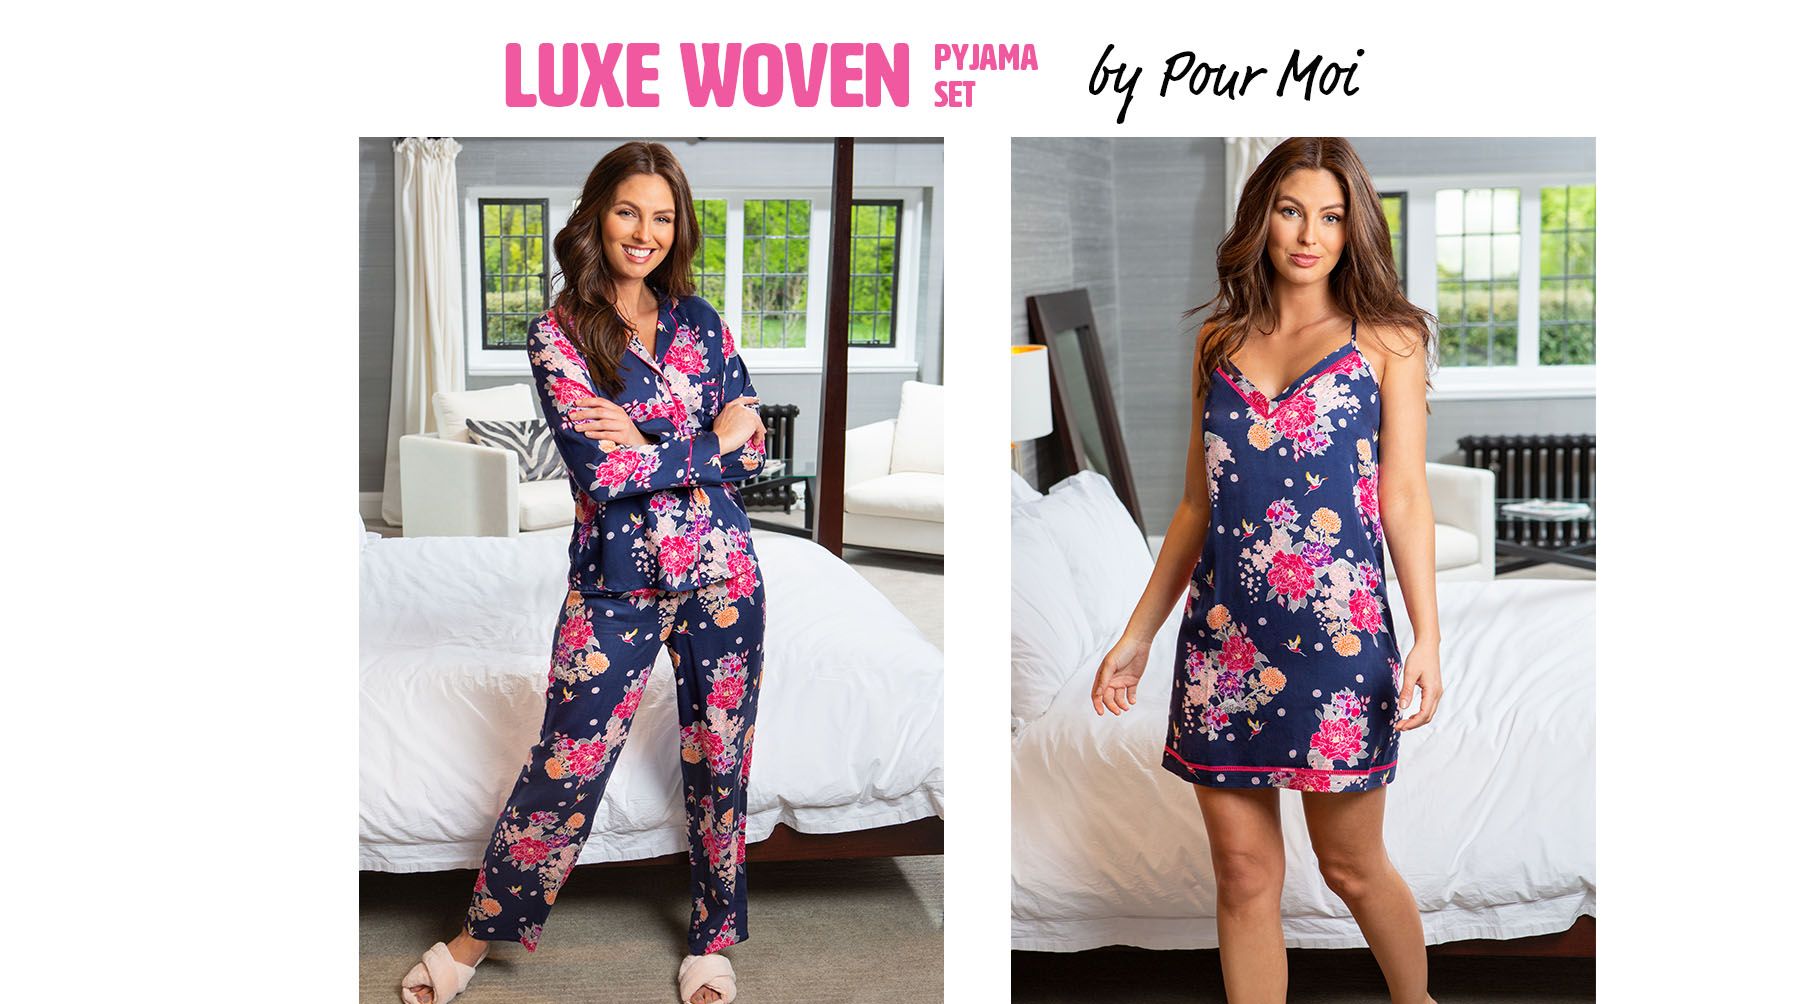 Luxe Woven by Pout Moi